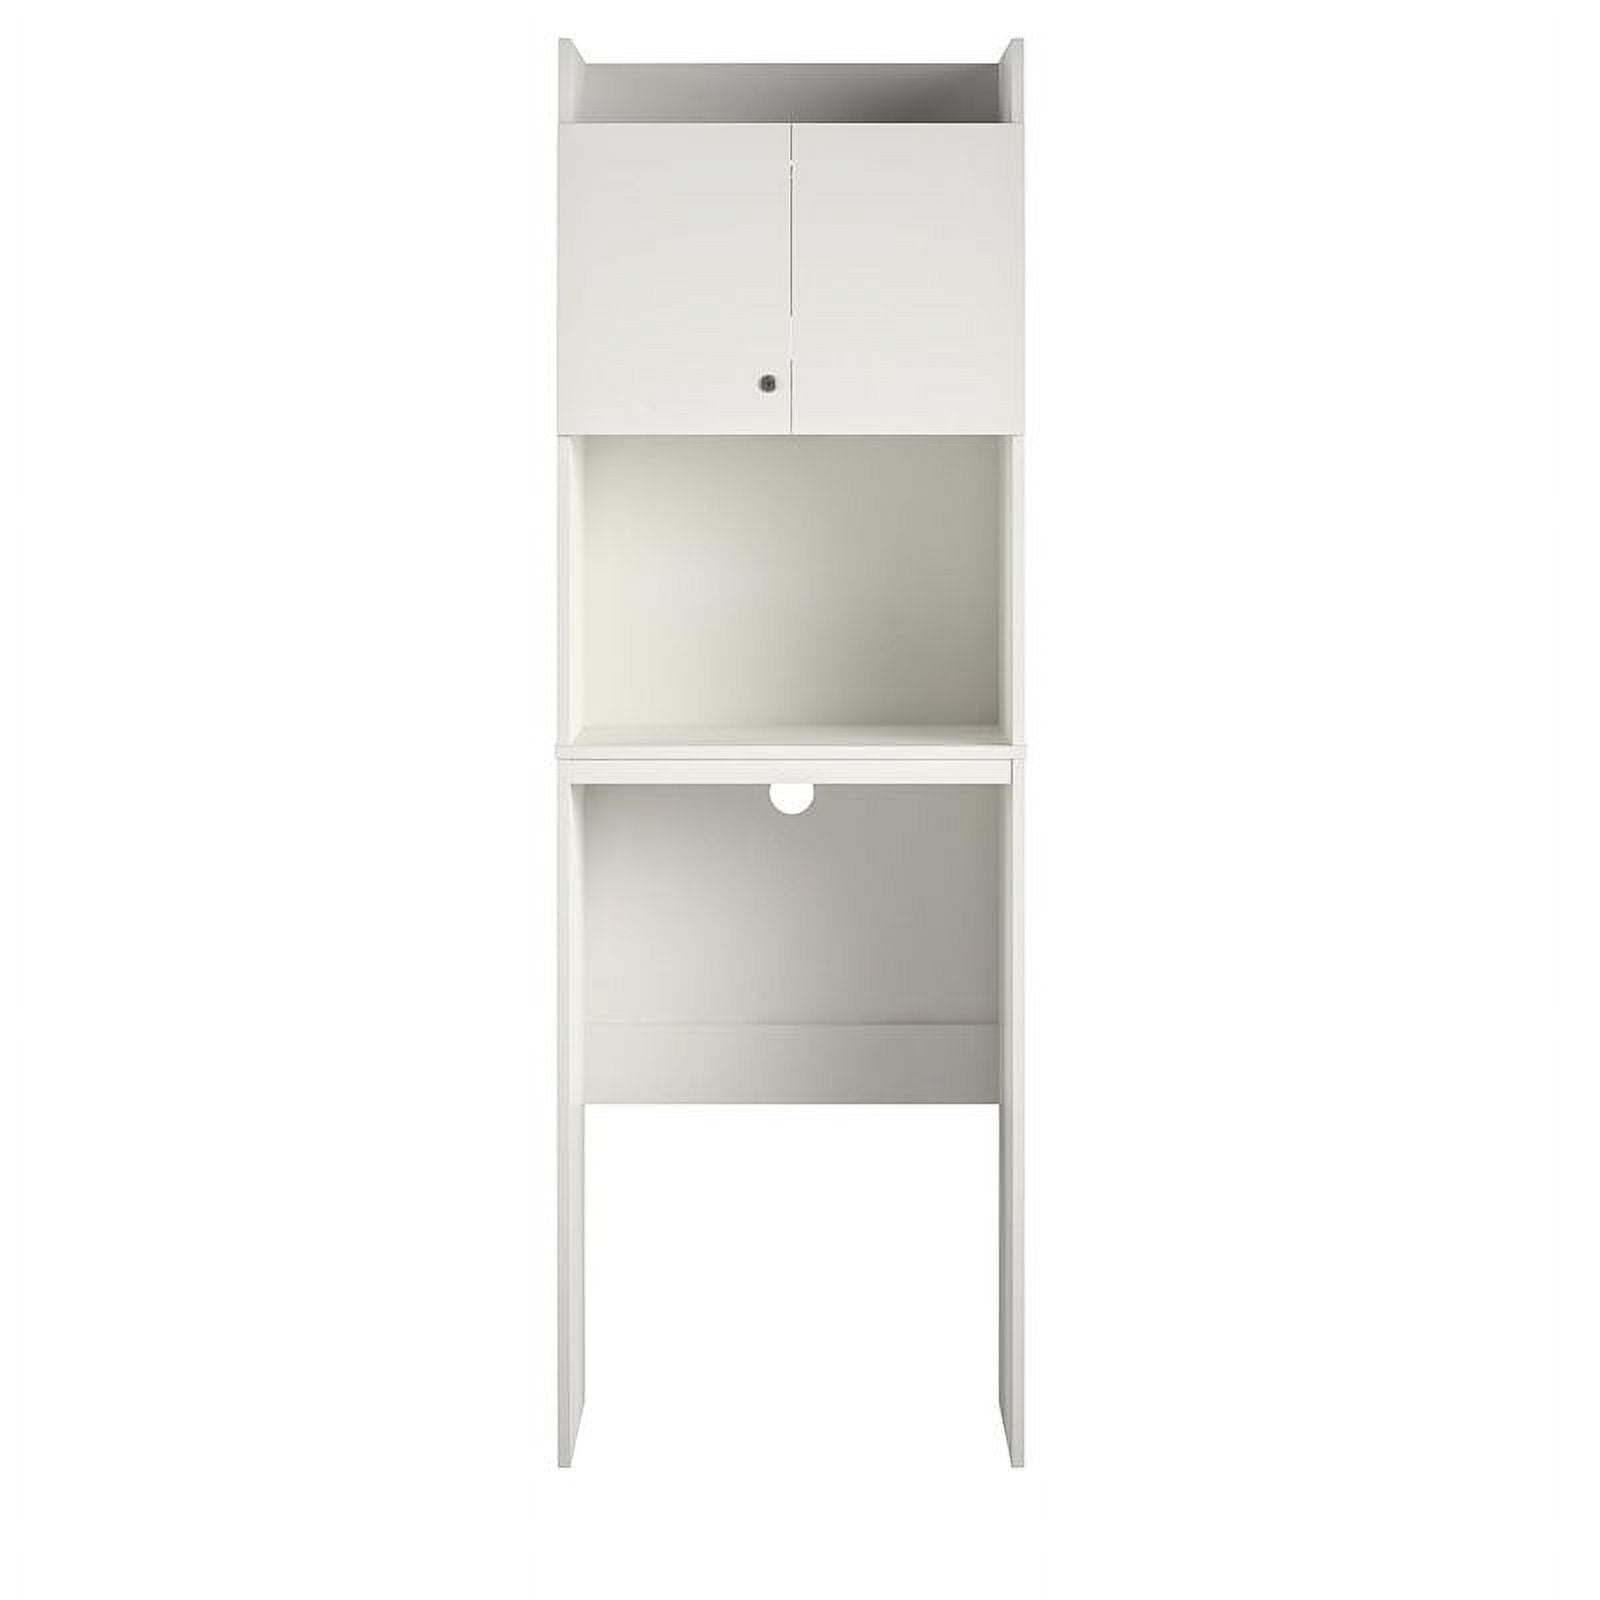 Ameriwood Home Clarkson Storage Cabinet in White 